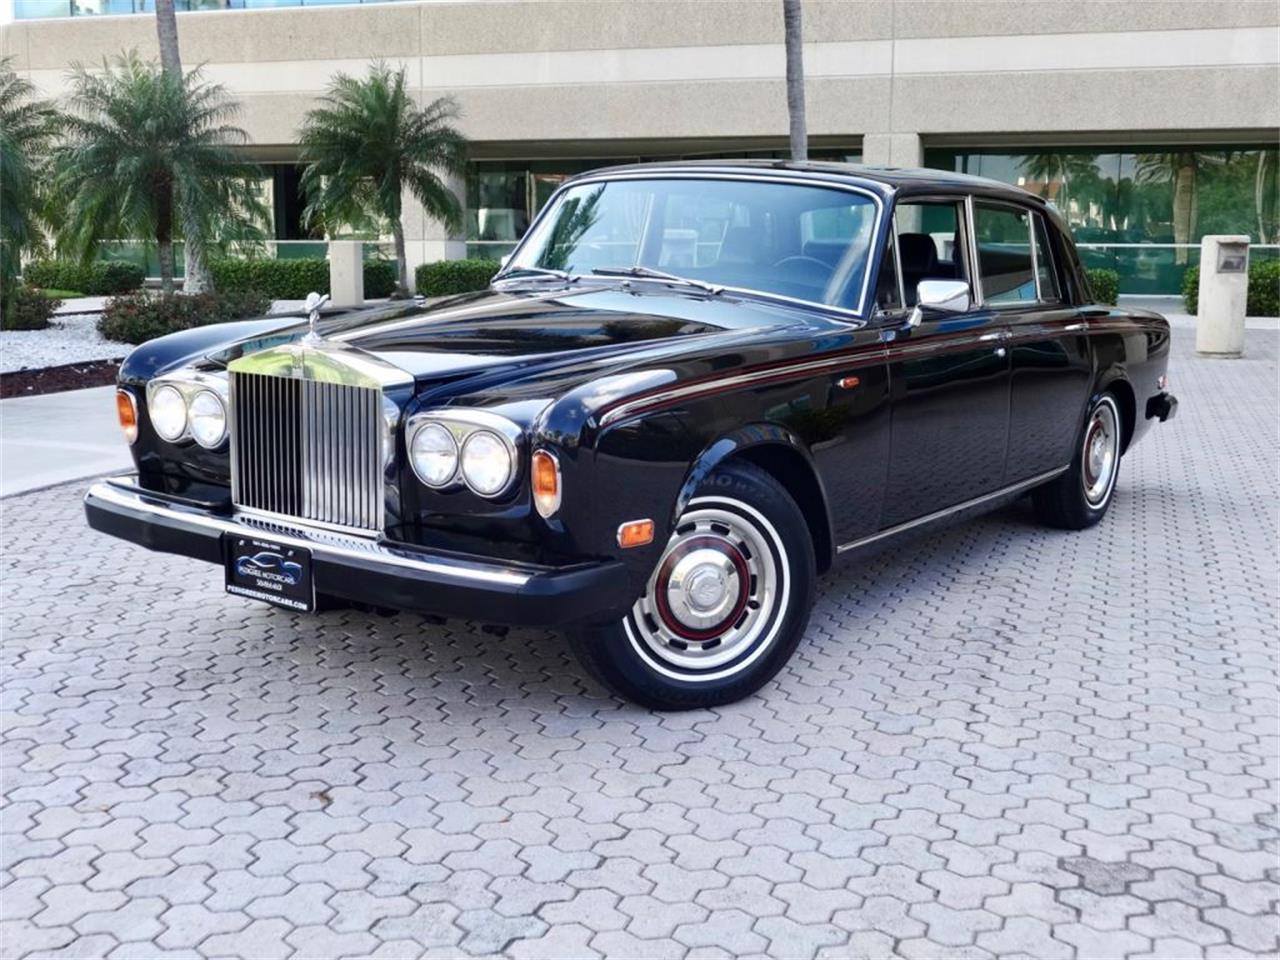 1971 Rolls Royce Silver Shadow Long Wheelbase Division Sedan For Sale On Bat Auctions Sold For 26 000 On December 19 2019 Lot 26 331 Bring A Trailer